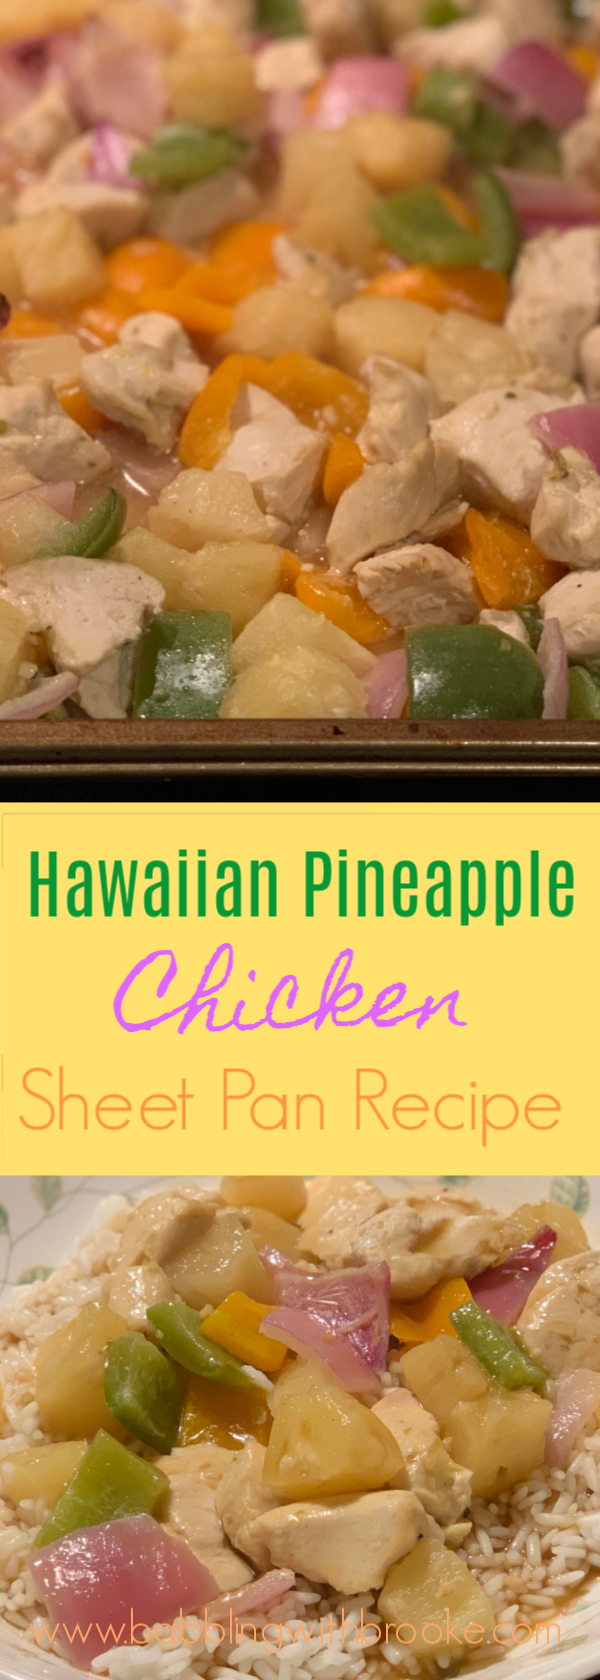 This chicken sheet pan recipe is so delicious and full of flavor that everyone in your family will love it! This Hawaiian Pineapple Chicken Sheet Pan recipe is also super easy to make. #sheetpandinner #sheetpanrecipe #hawaiianpineapplechickenrecipe #easydinnerrecipe #sheetpandinnerrecipe